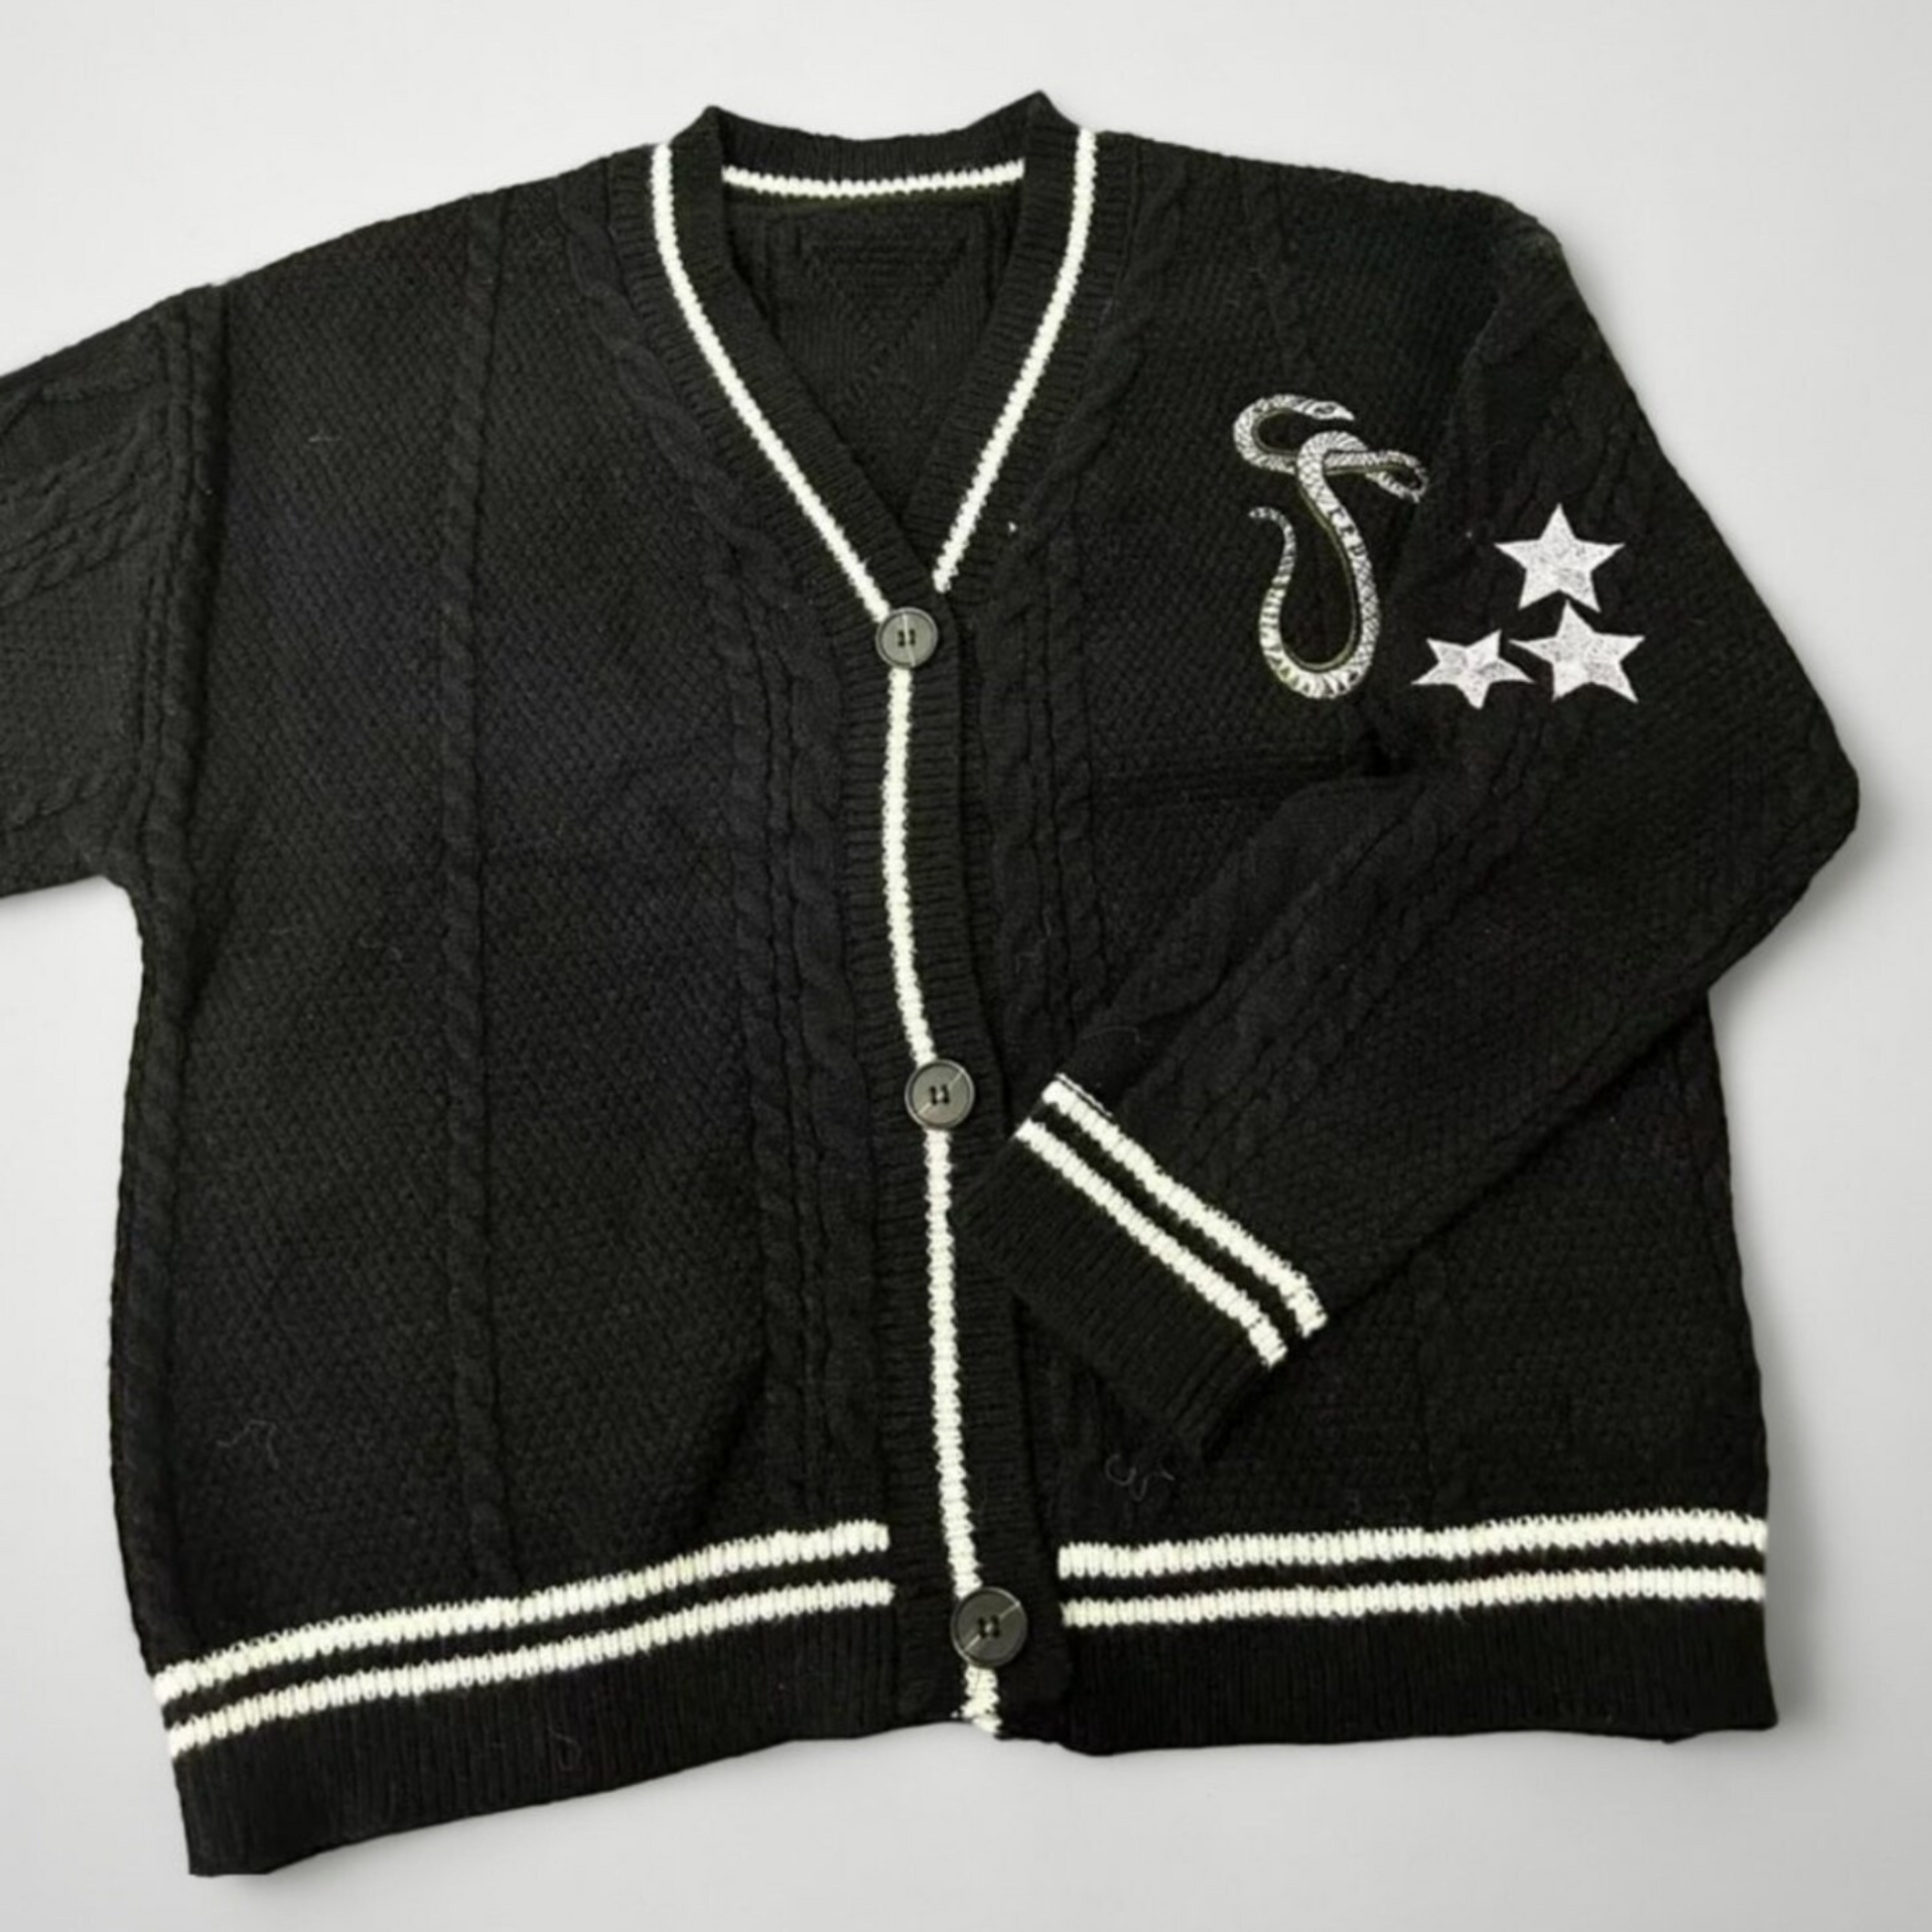 black reputation cardigan with white stars on left hem and embroidered snake